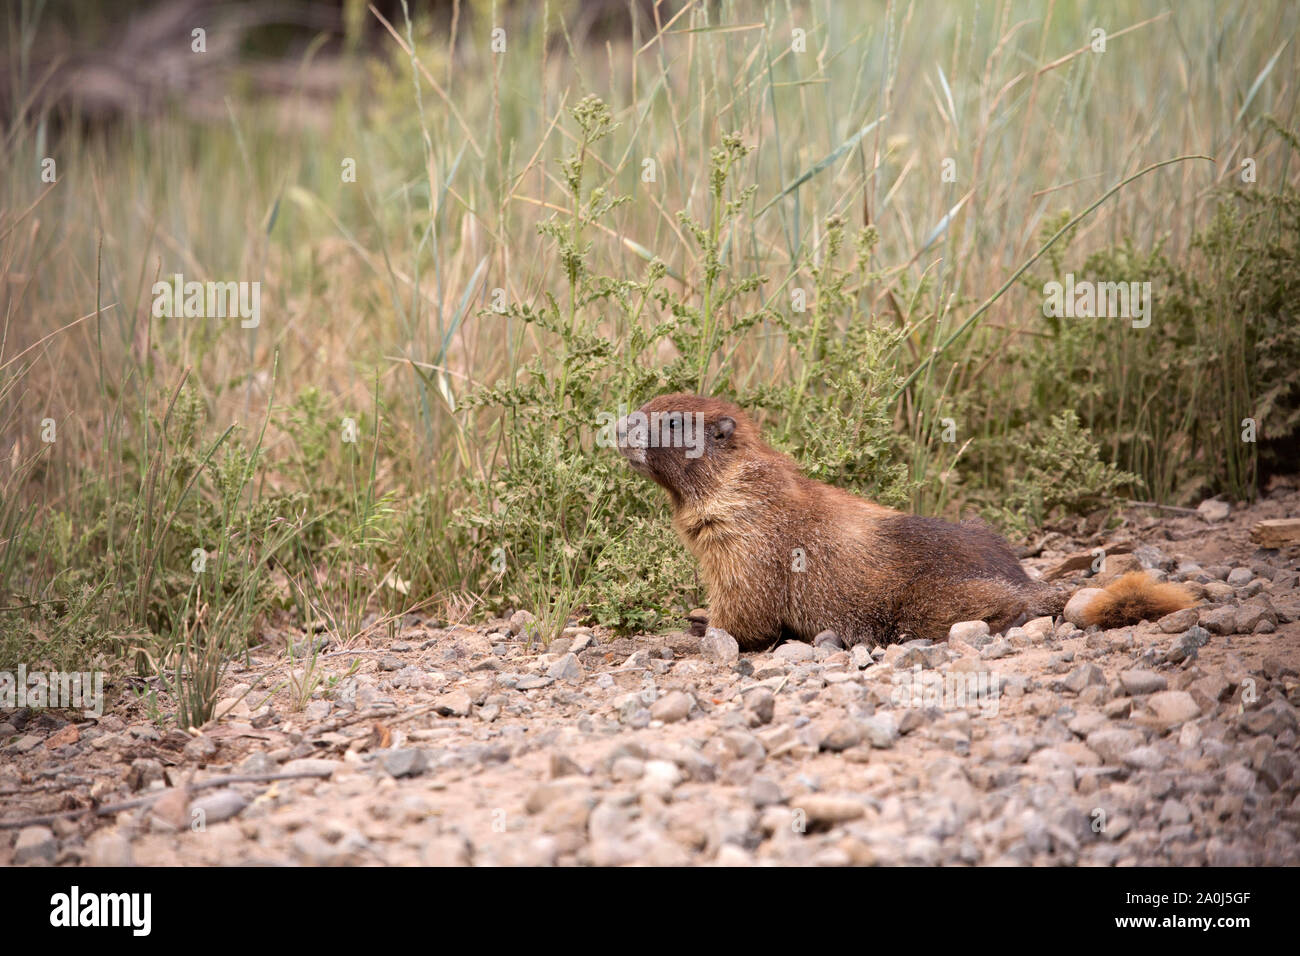 A wild marmot peers out from brush in Southwest Colorado. Stock Photo